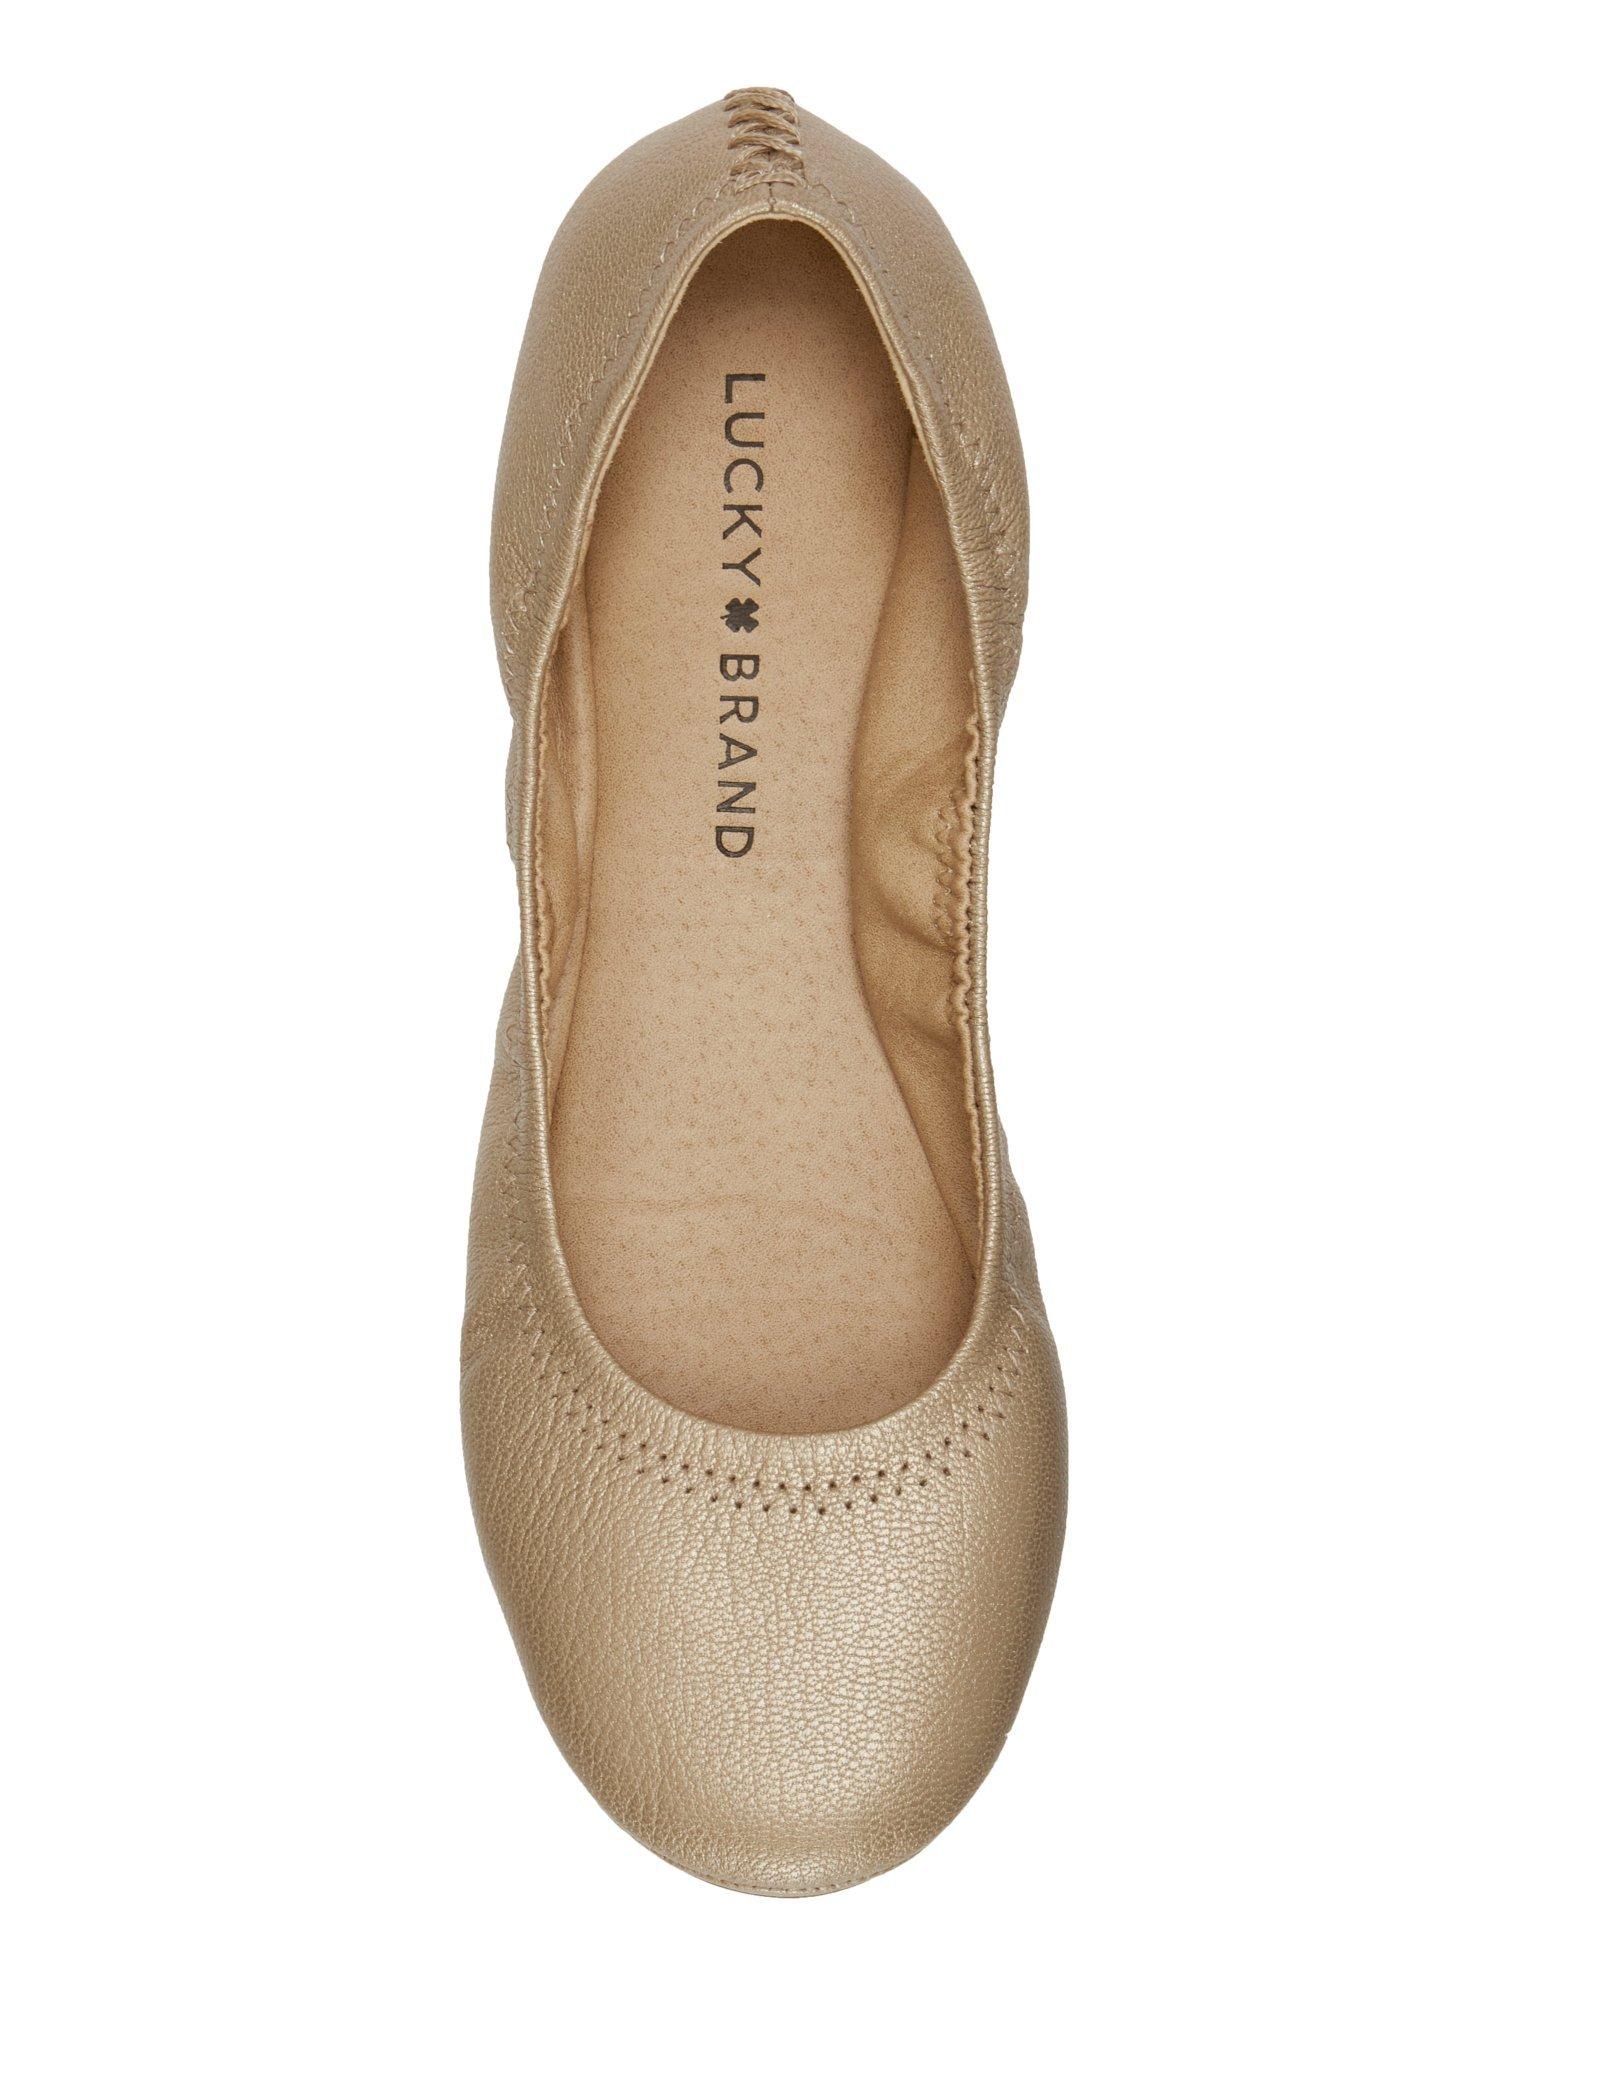 EMMIE LEATHER FLATS, image 6